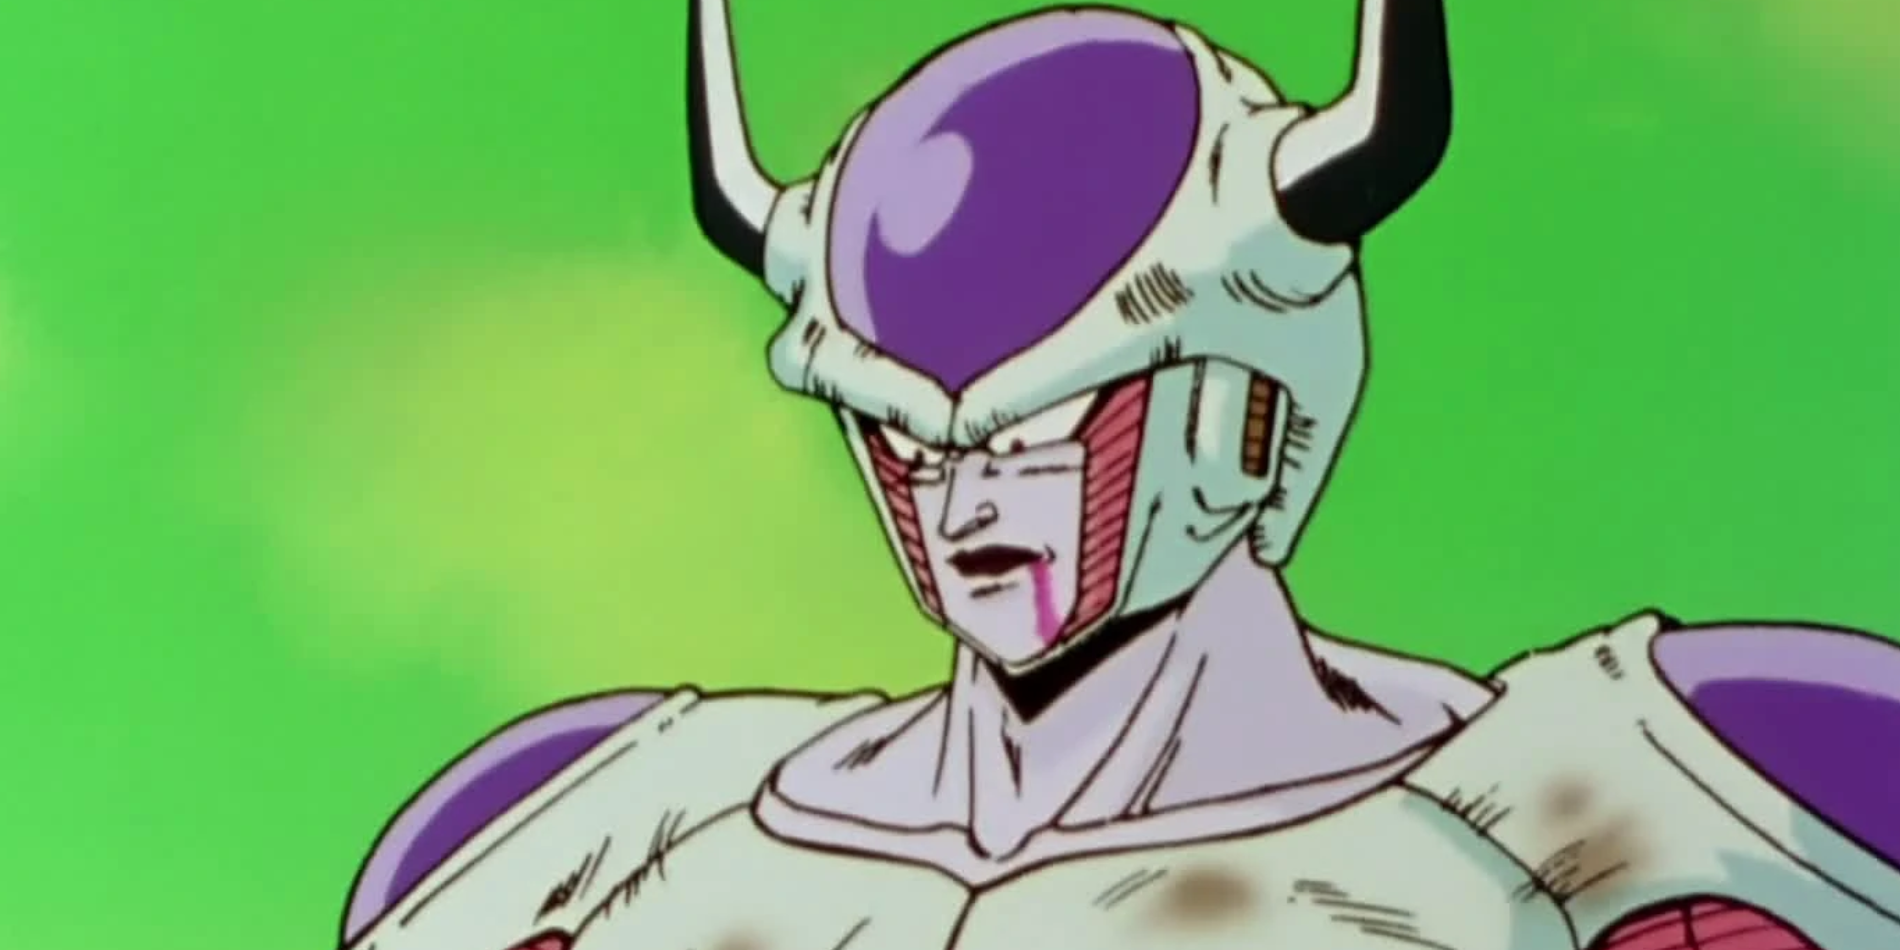 Frieza in shown his Second Form in front of green background.